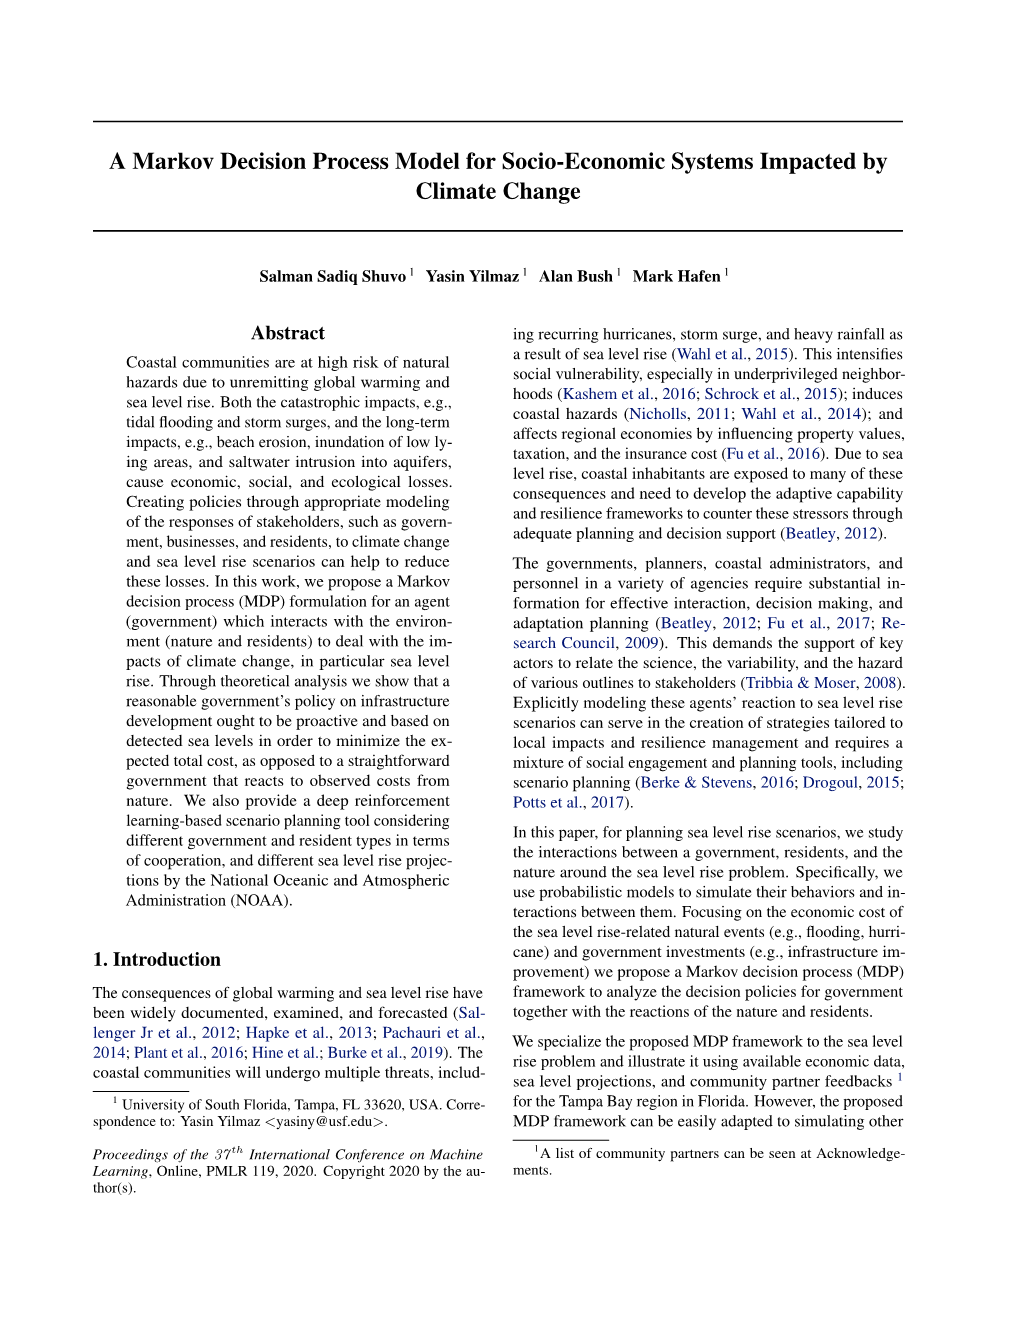 A Markov Decision Process Model for Socio-Economic Systems Impacted by Climate Change